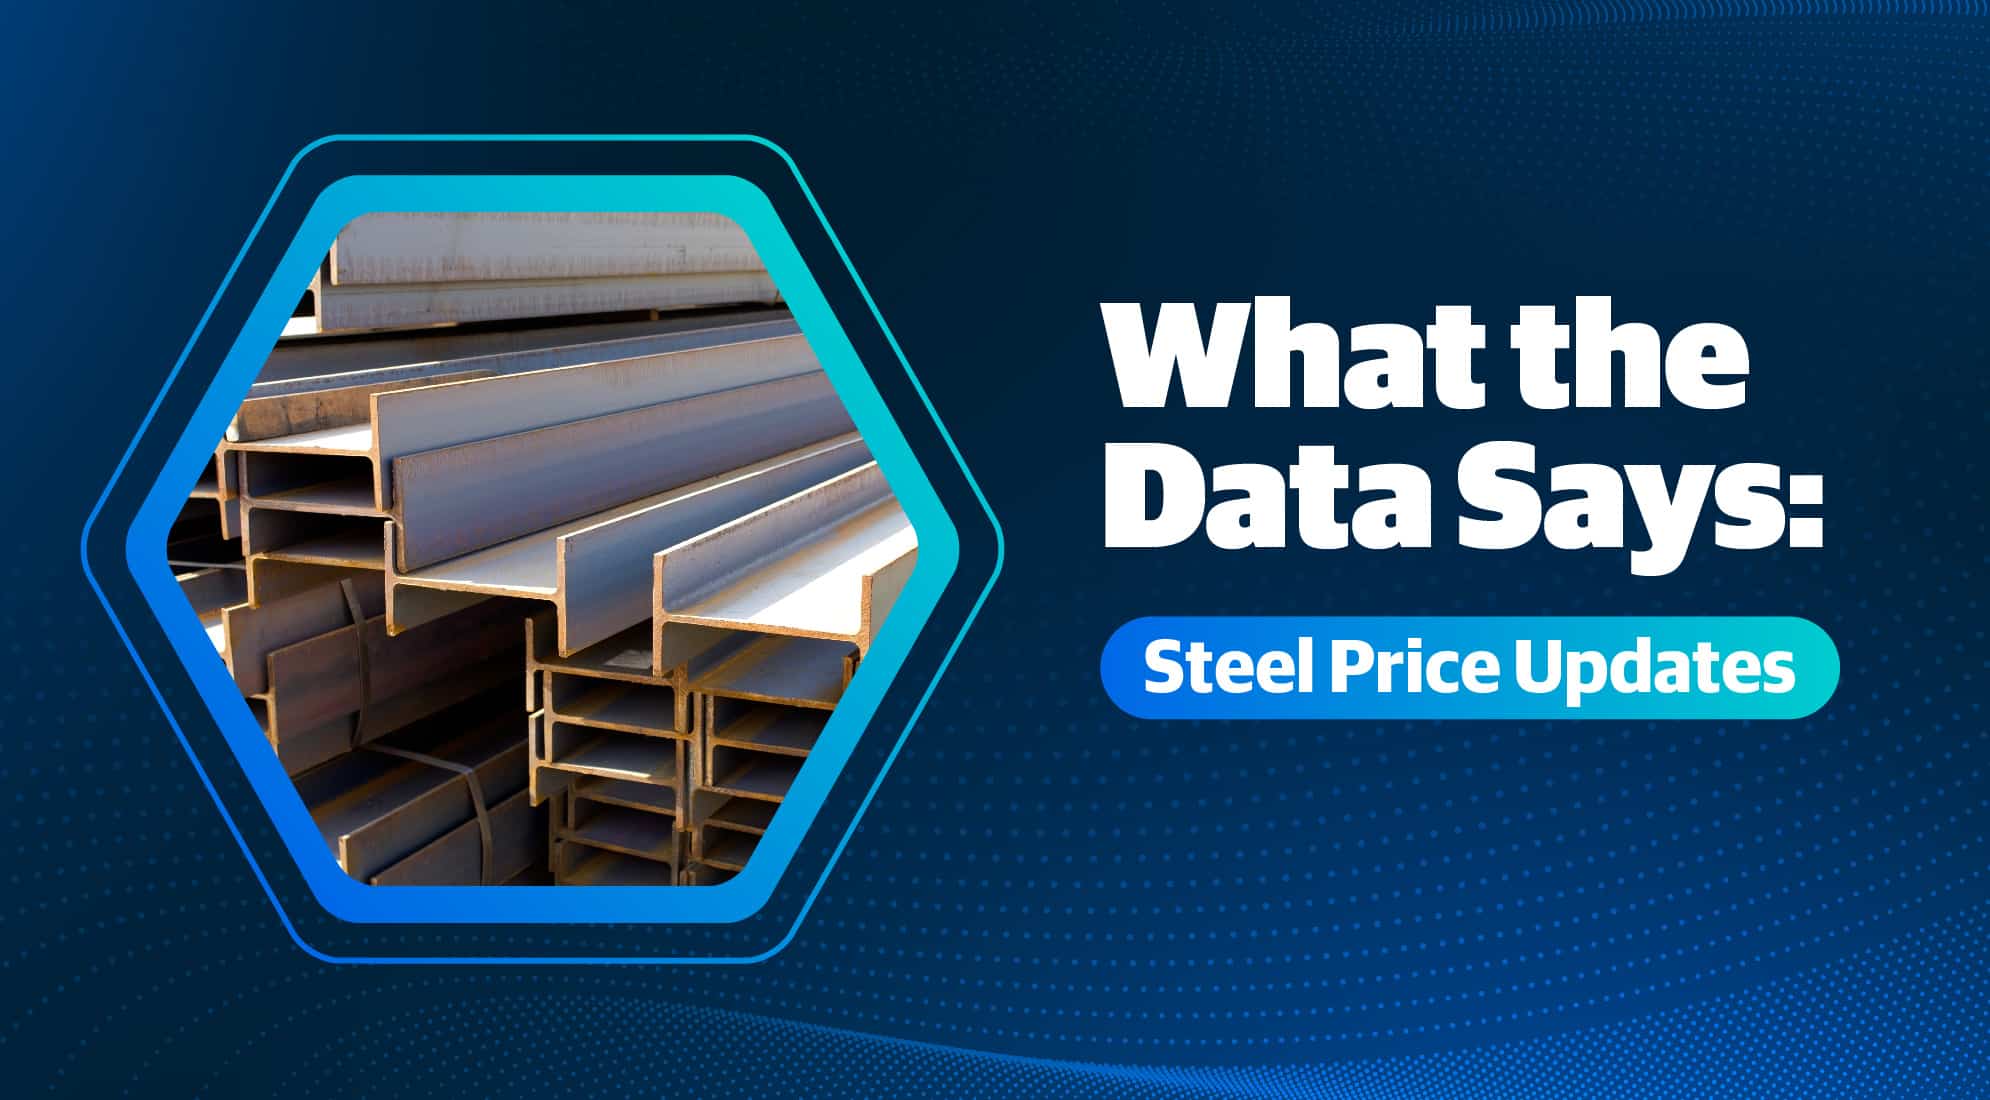 What the Data Says: Steel Price Updates